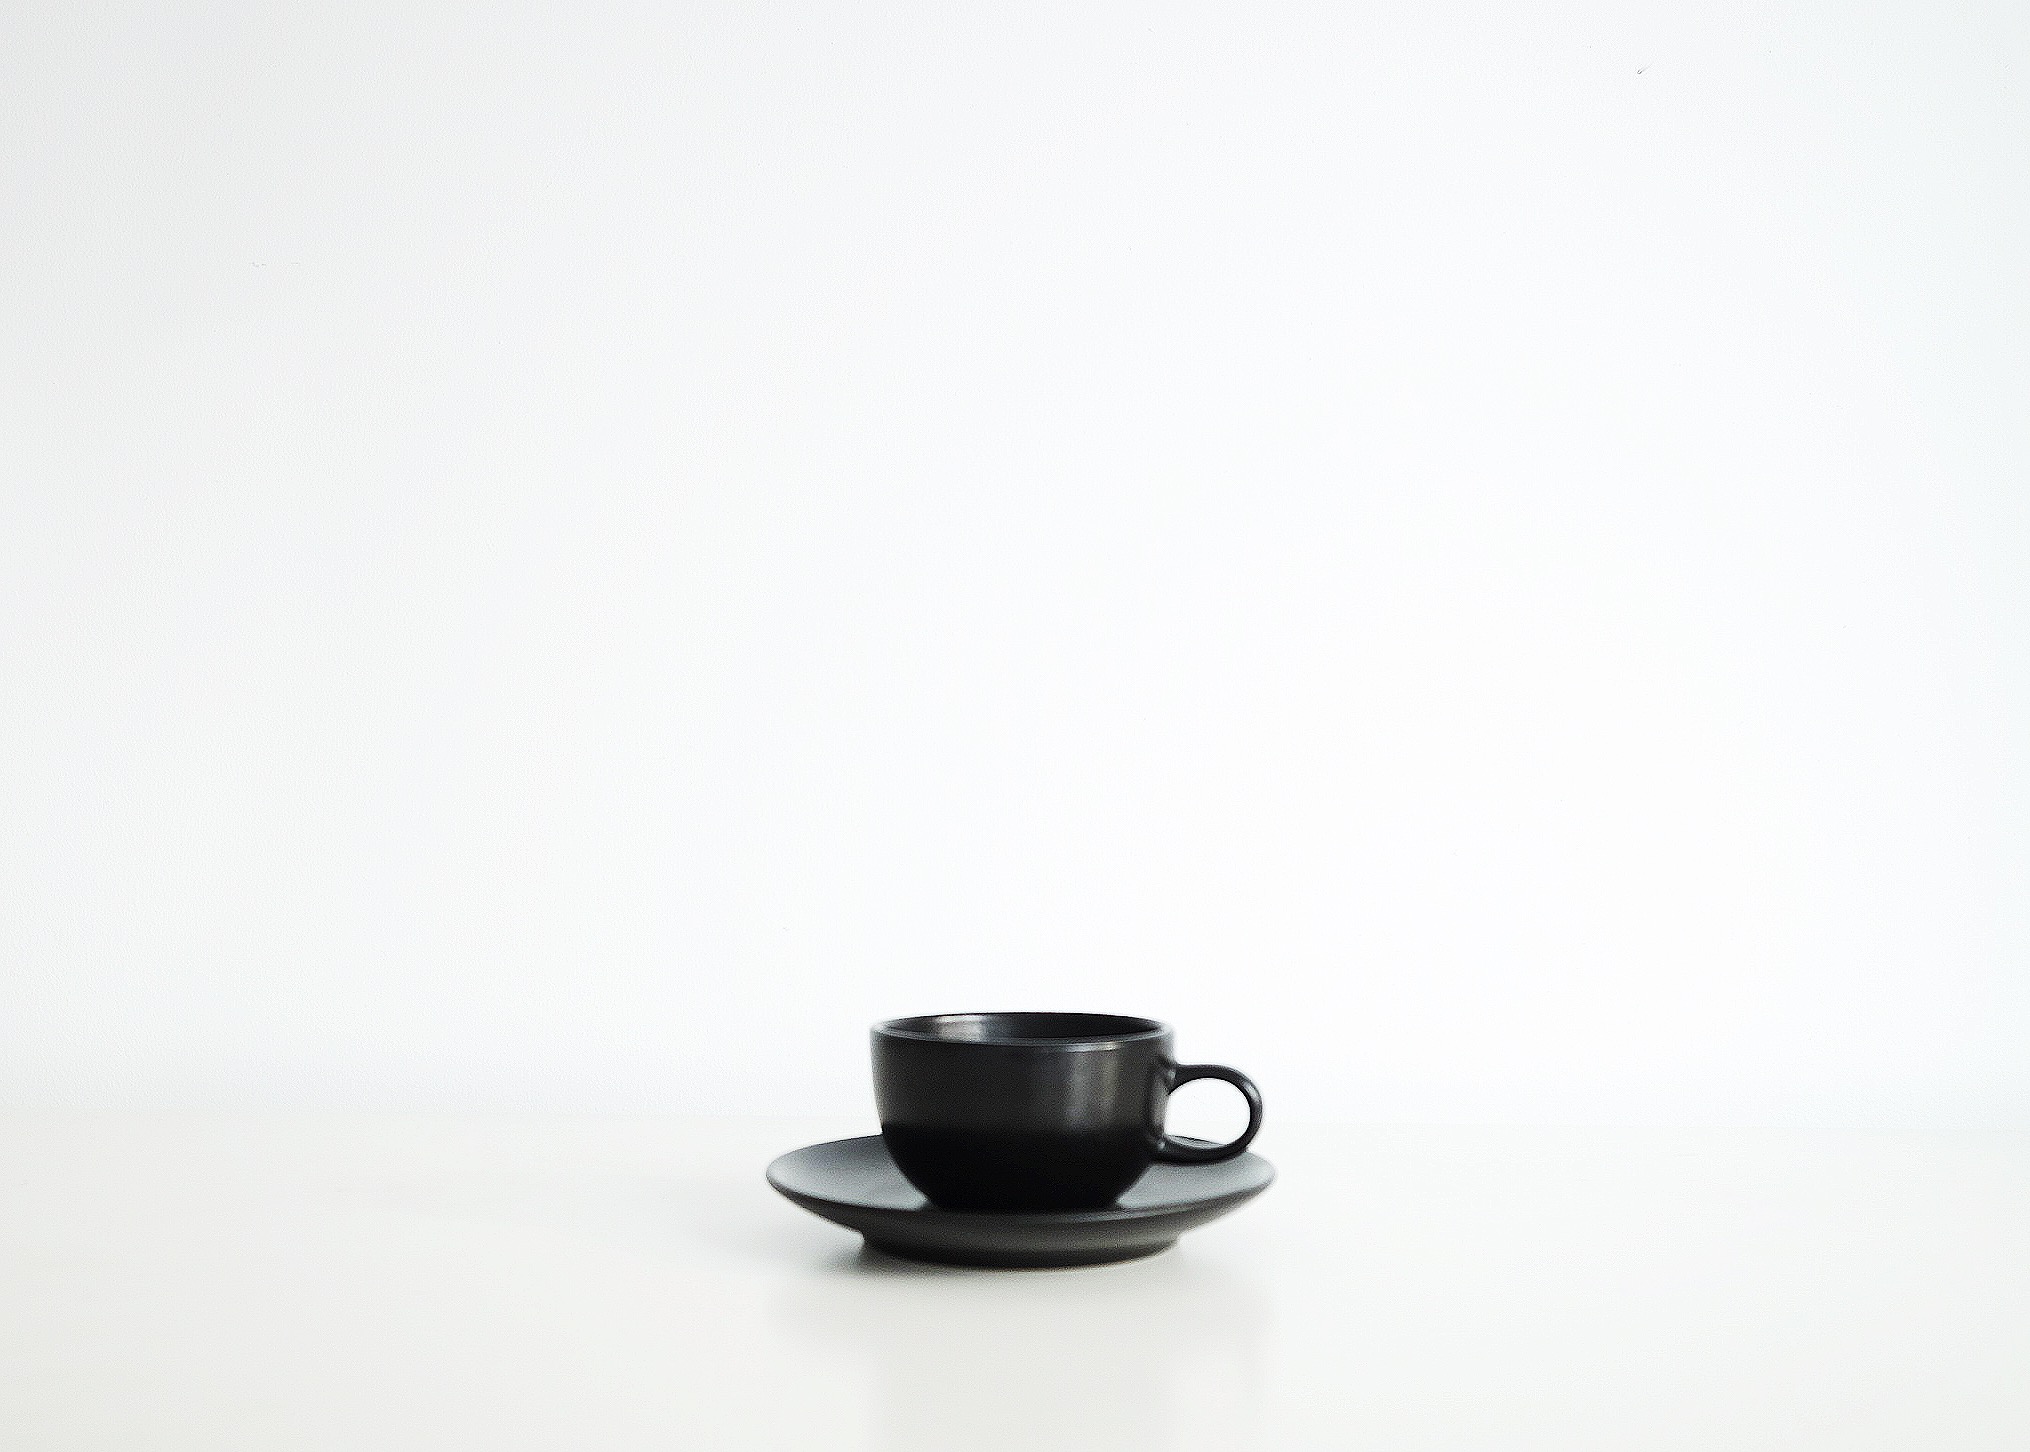 Watch a Video About the Worlds Smallest Cup of Coffee